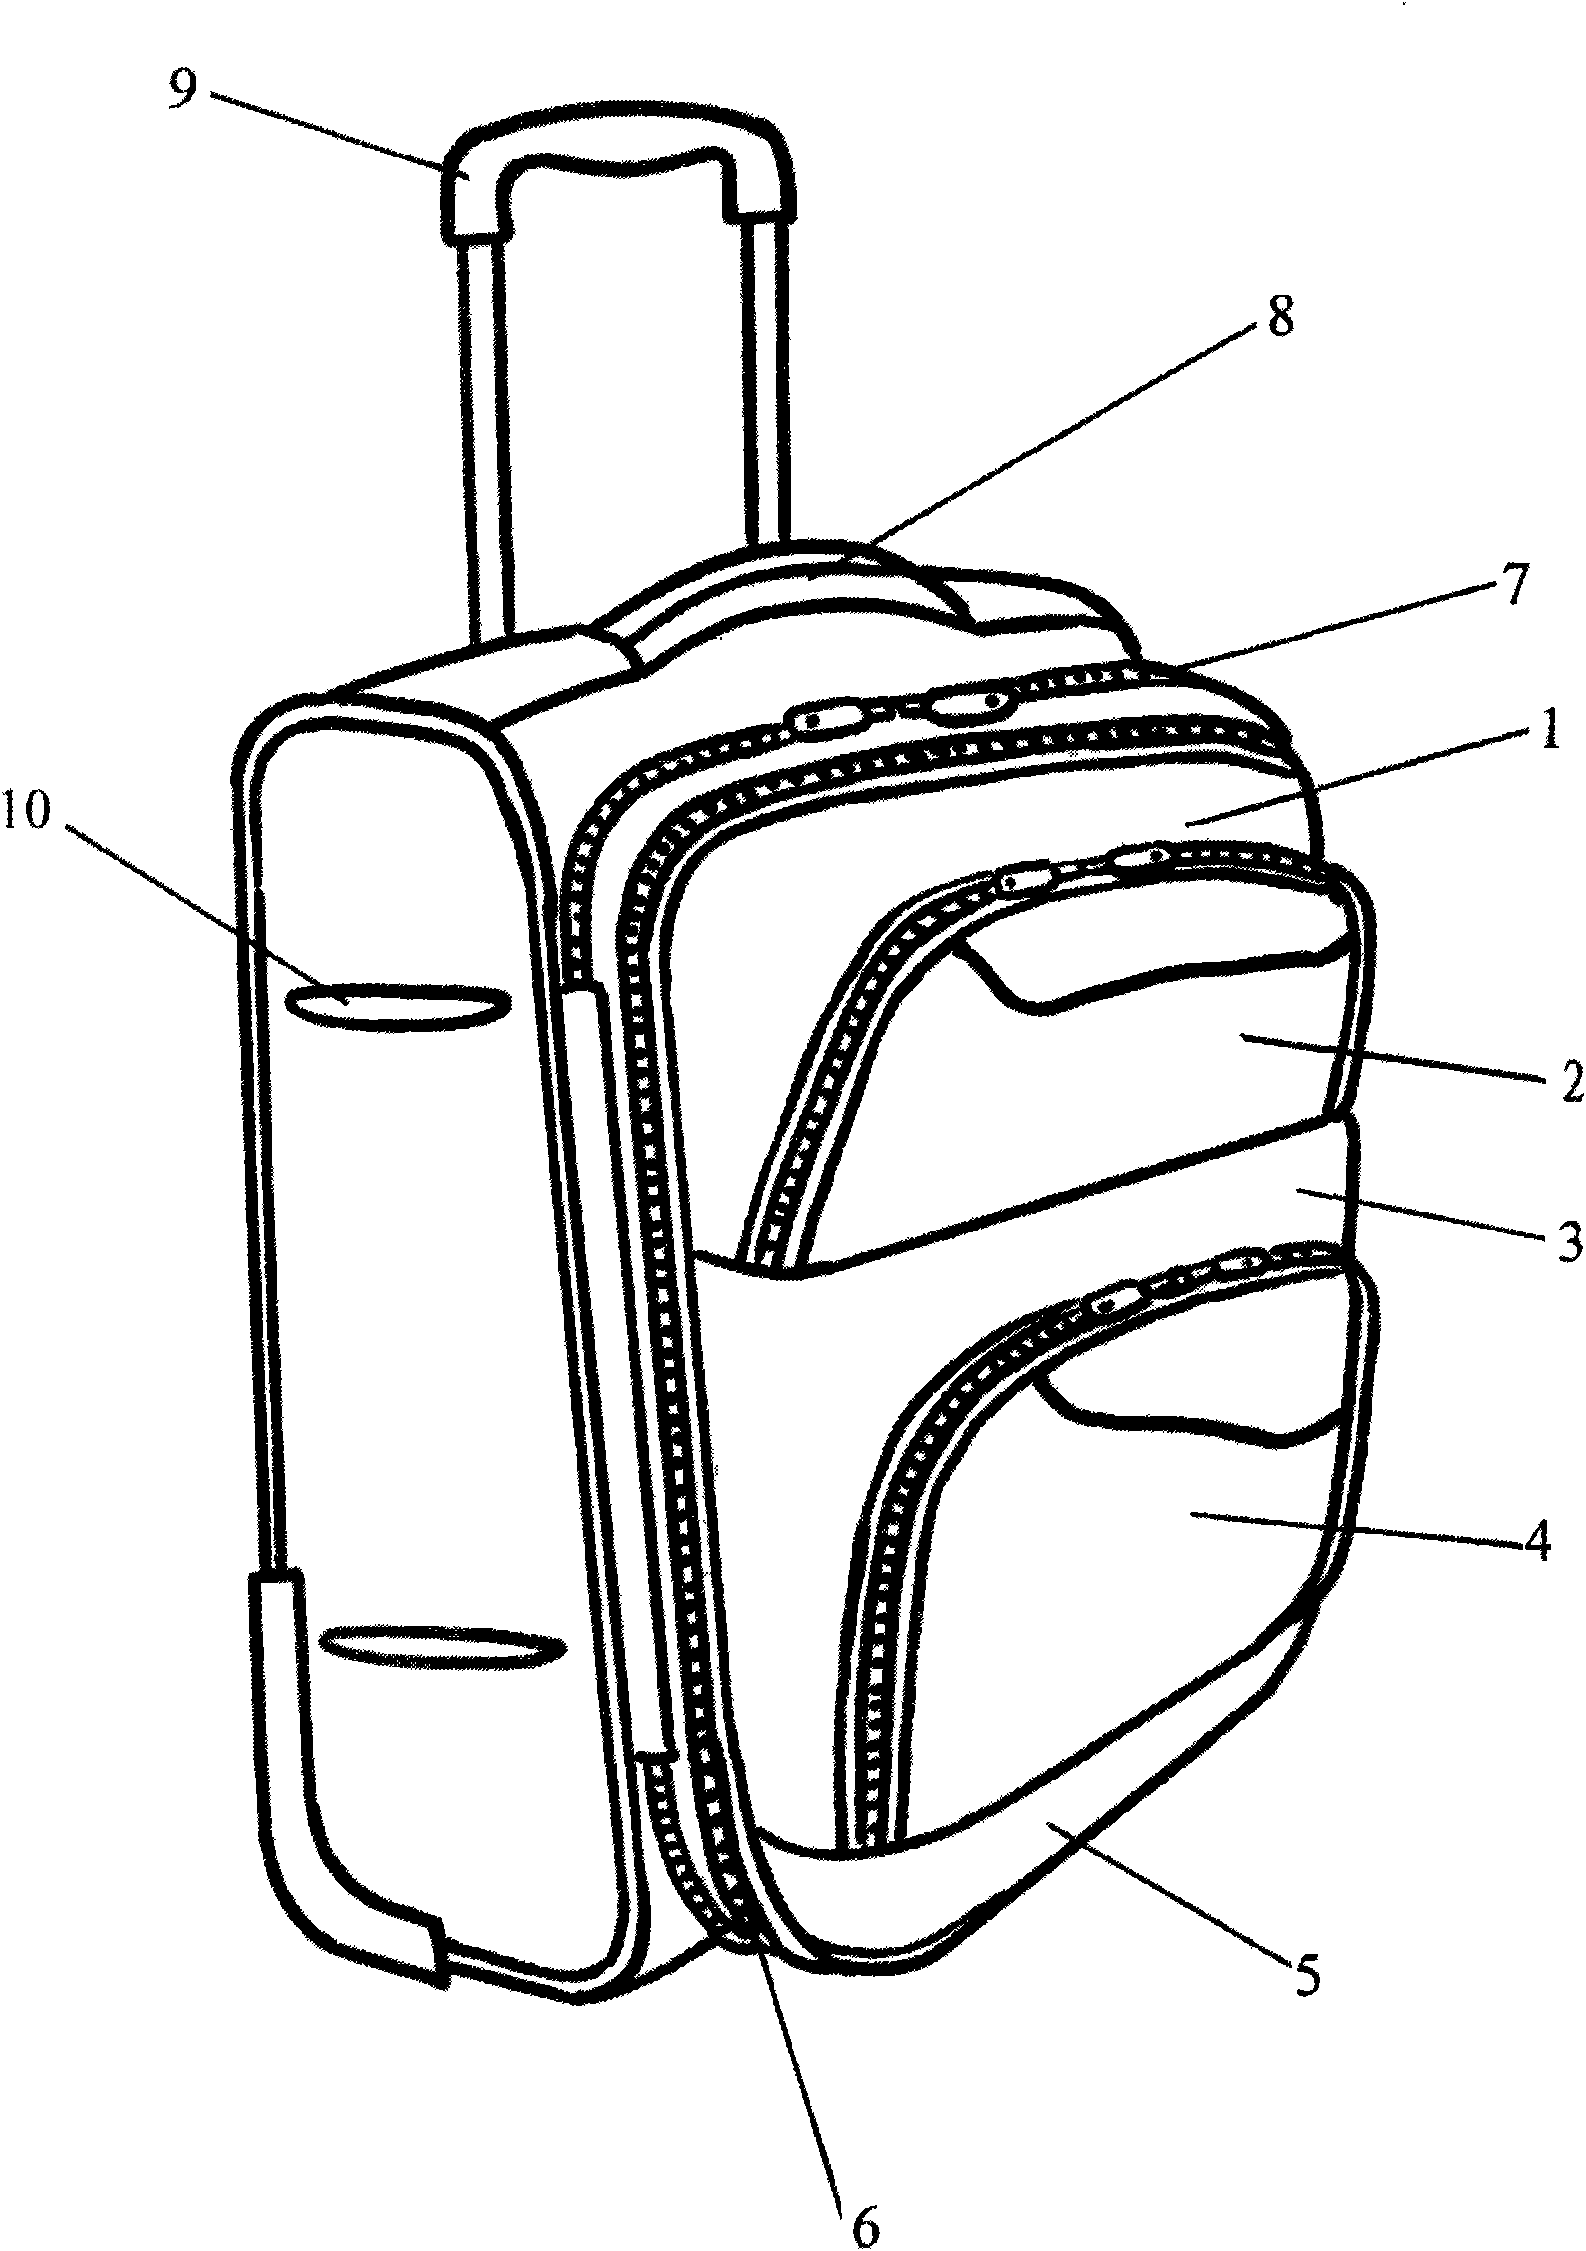 Draw-bar box with two convex pockets up and down and two bracing bars